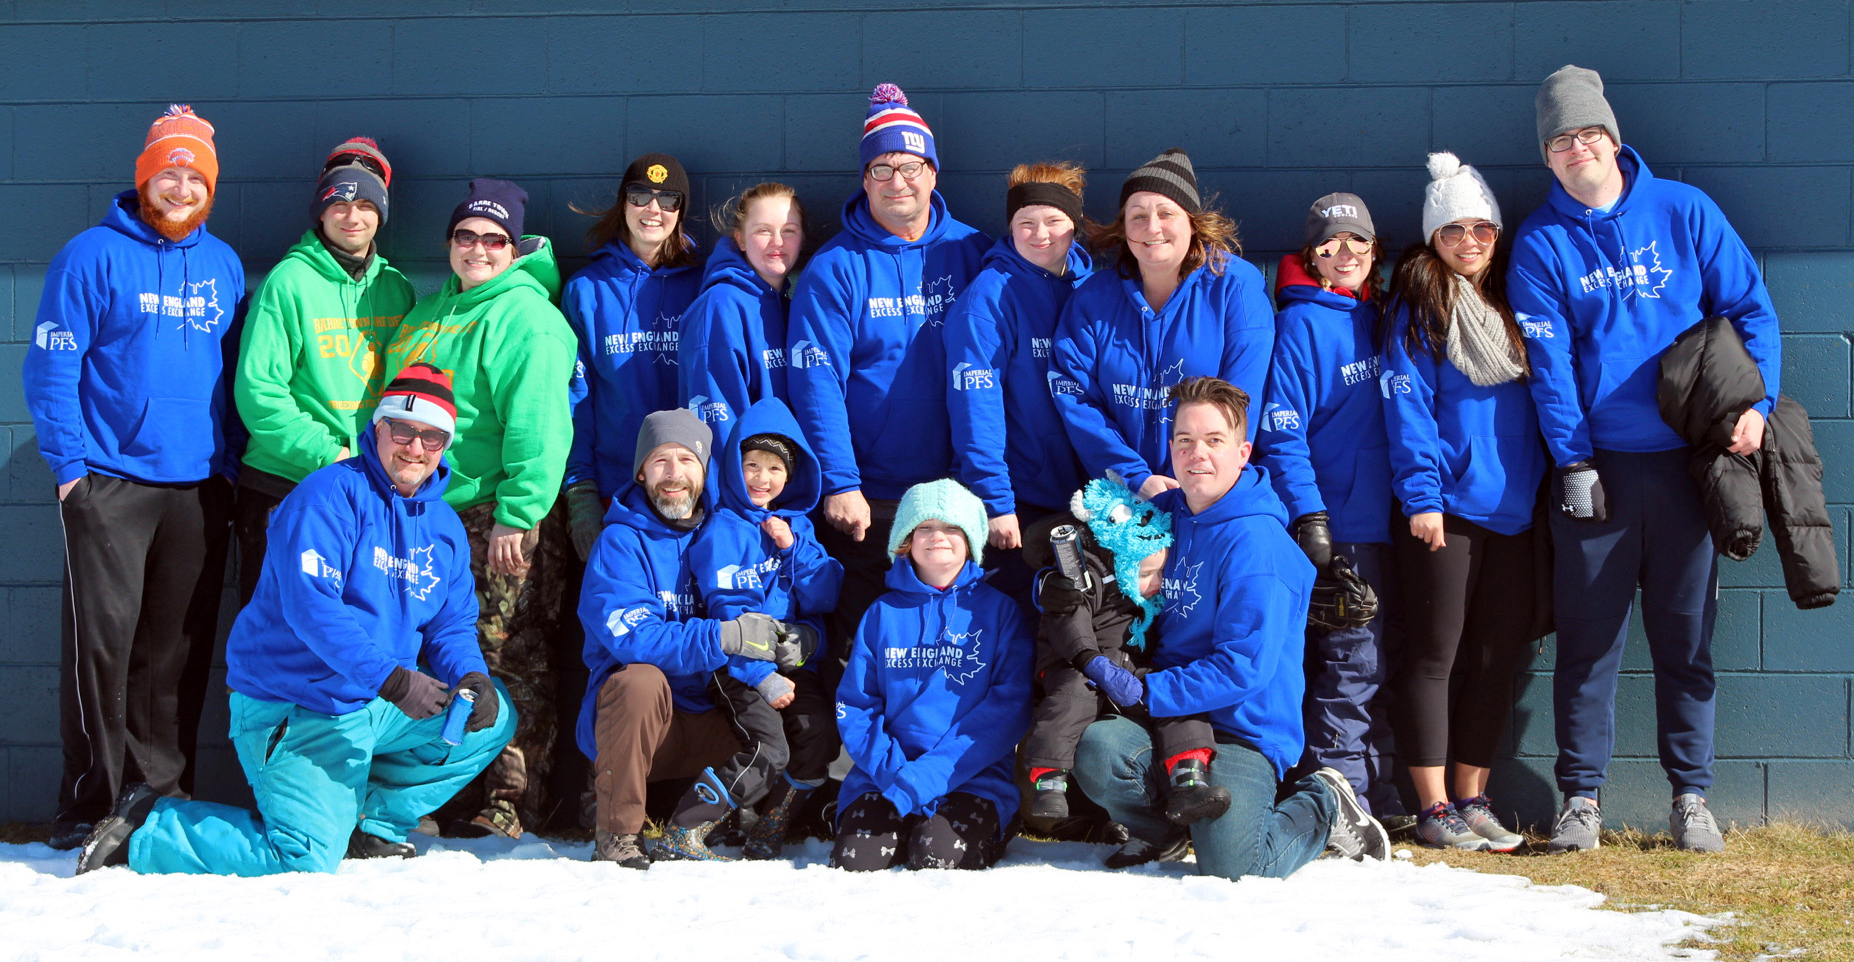 New England Excess Exchange Supports Freezing Fun for Families